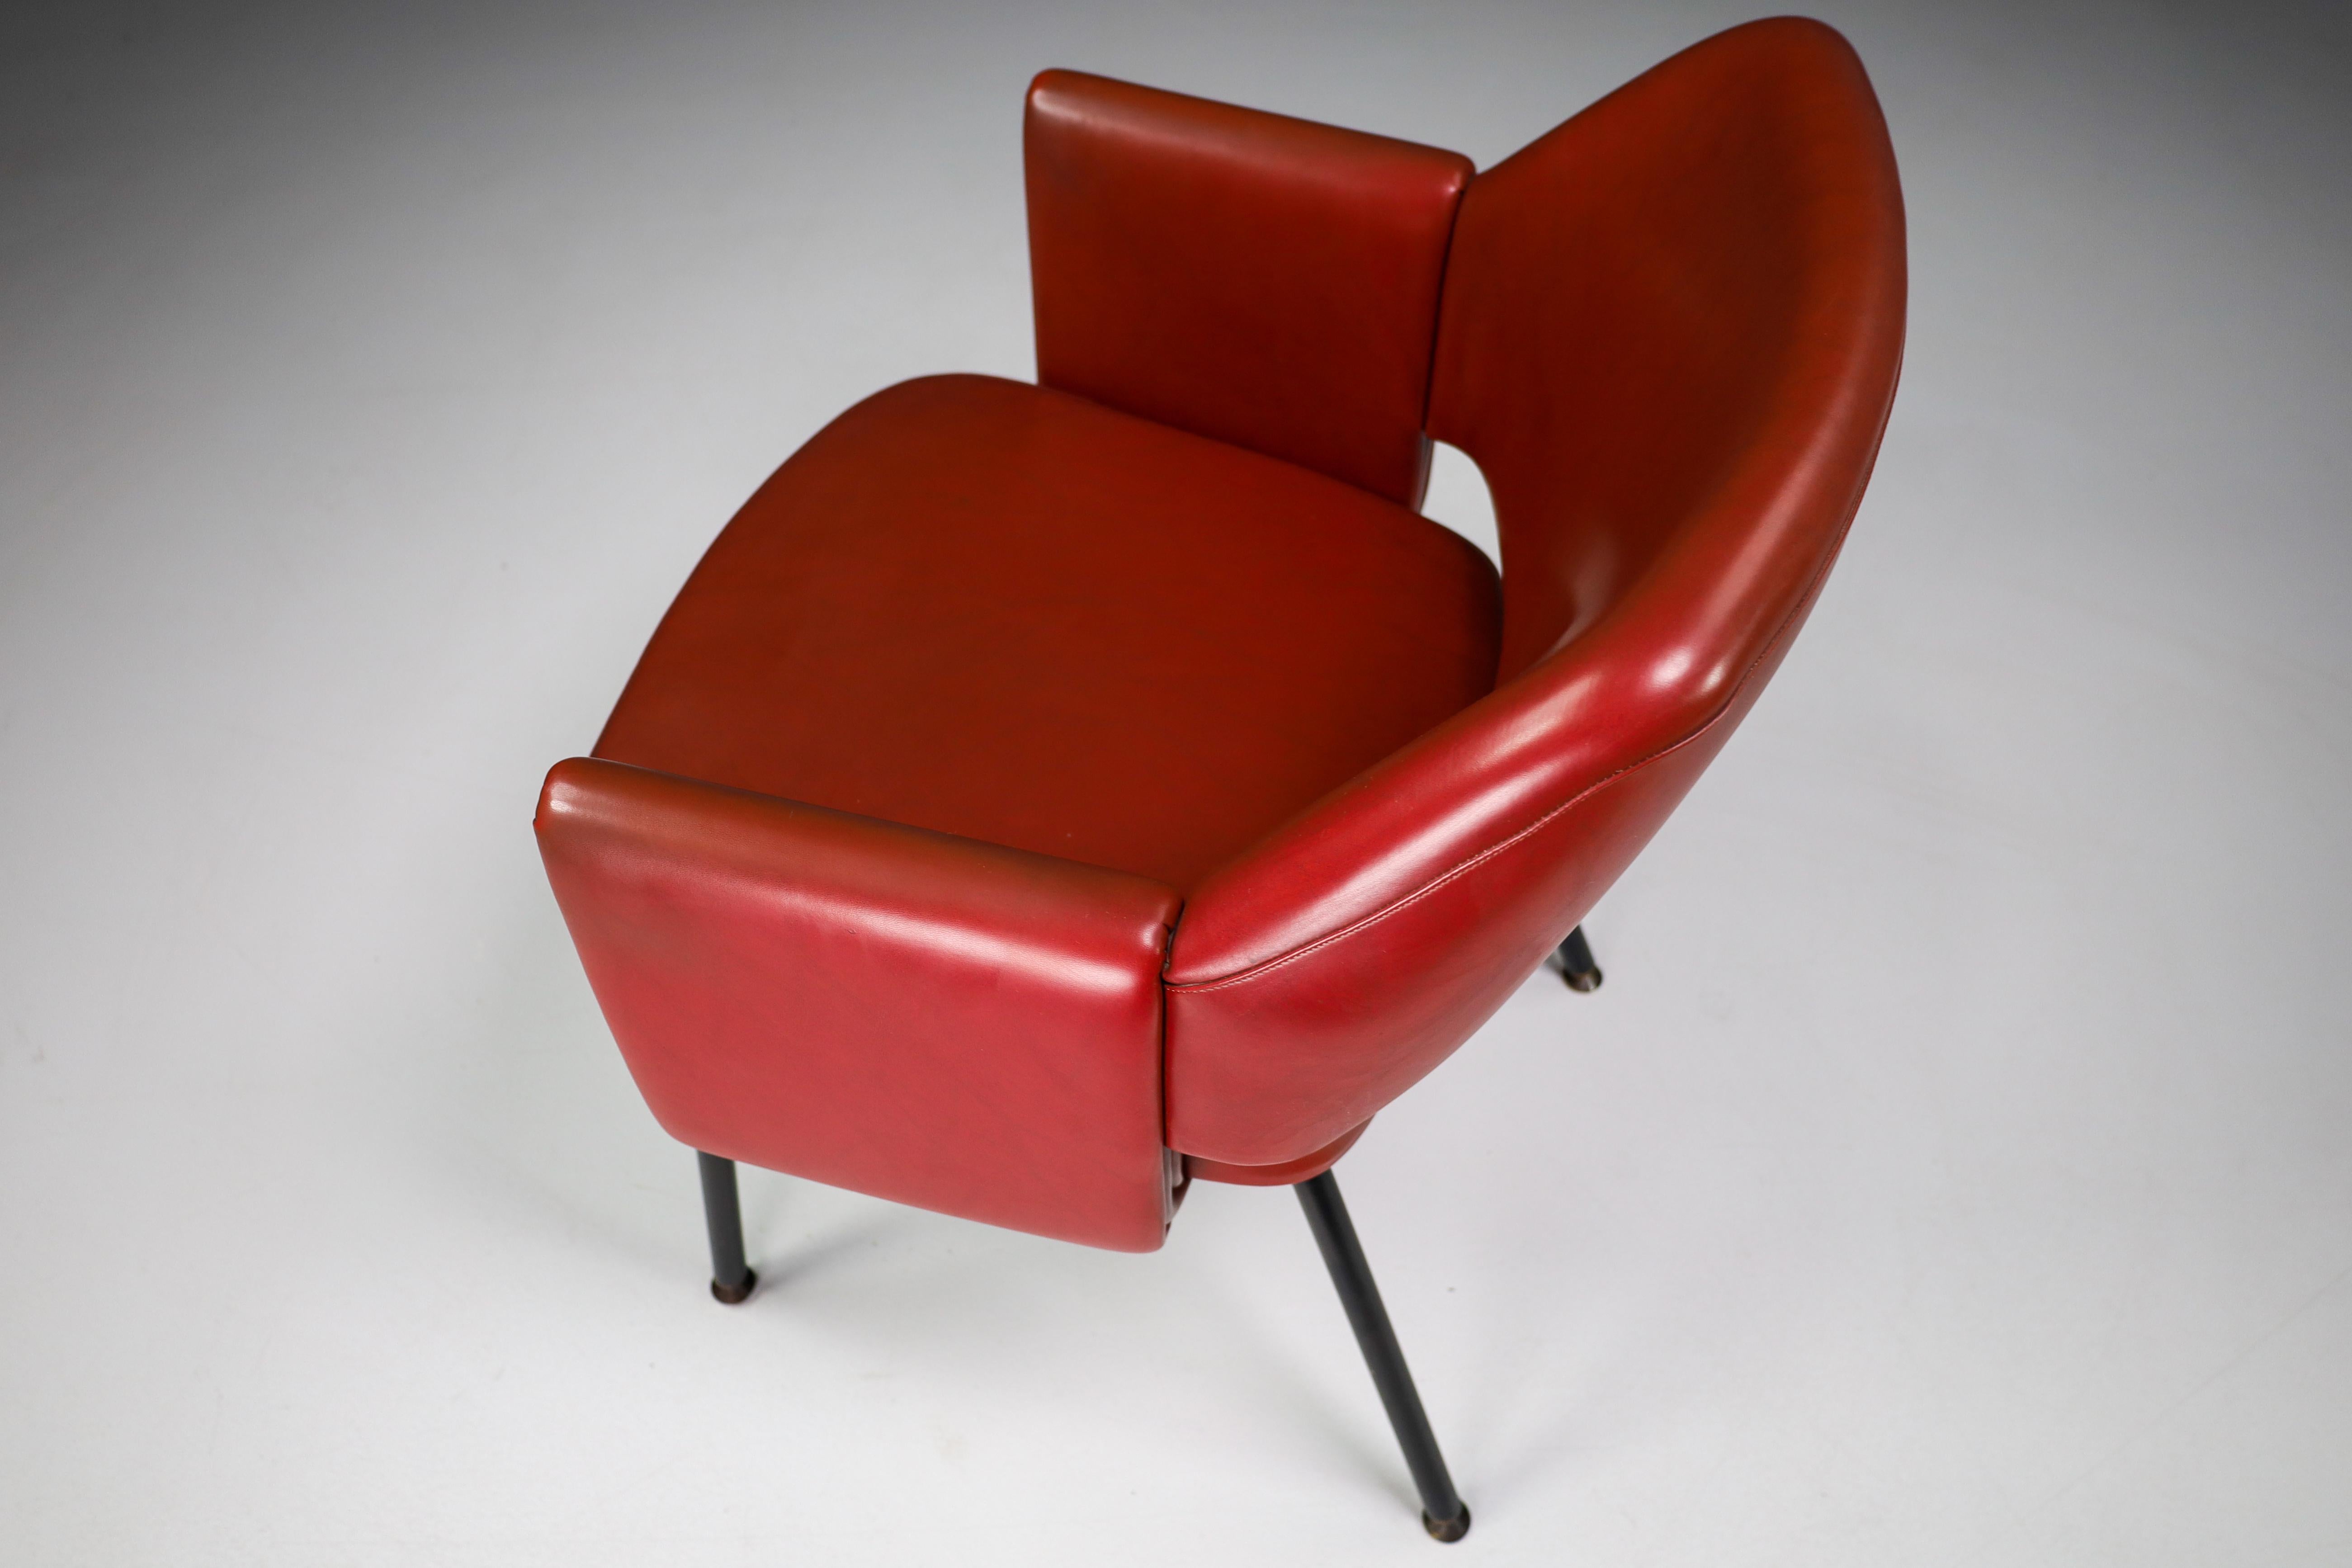 French Midcentury Chair Model 